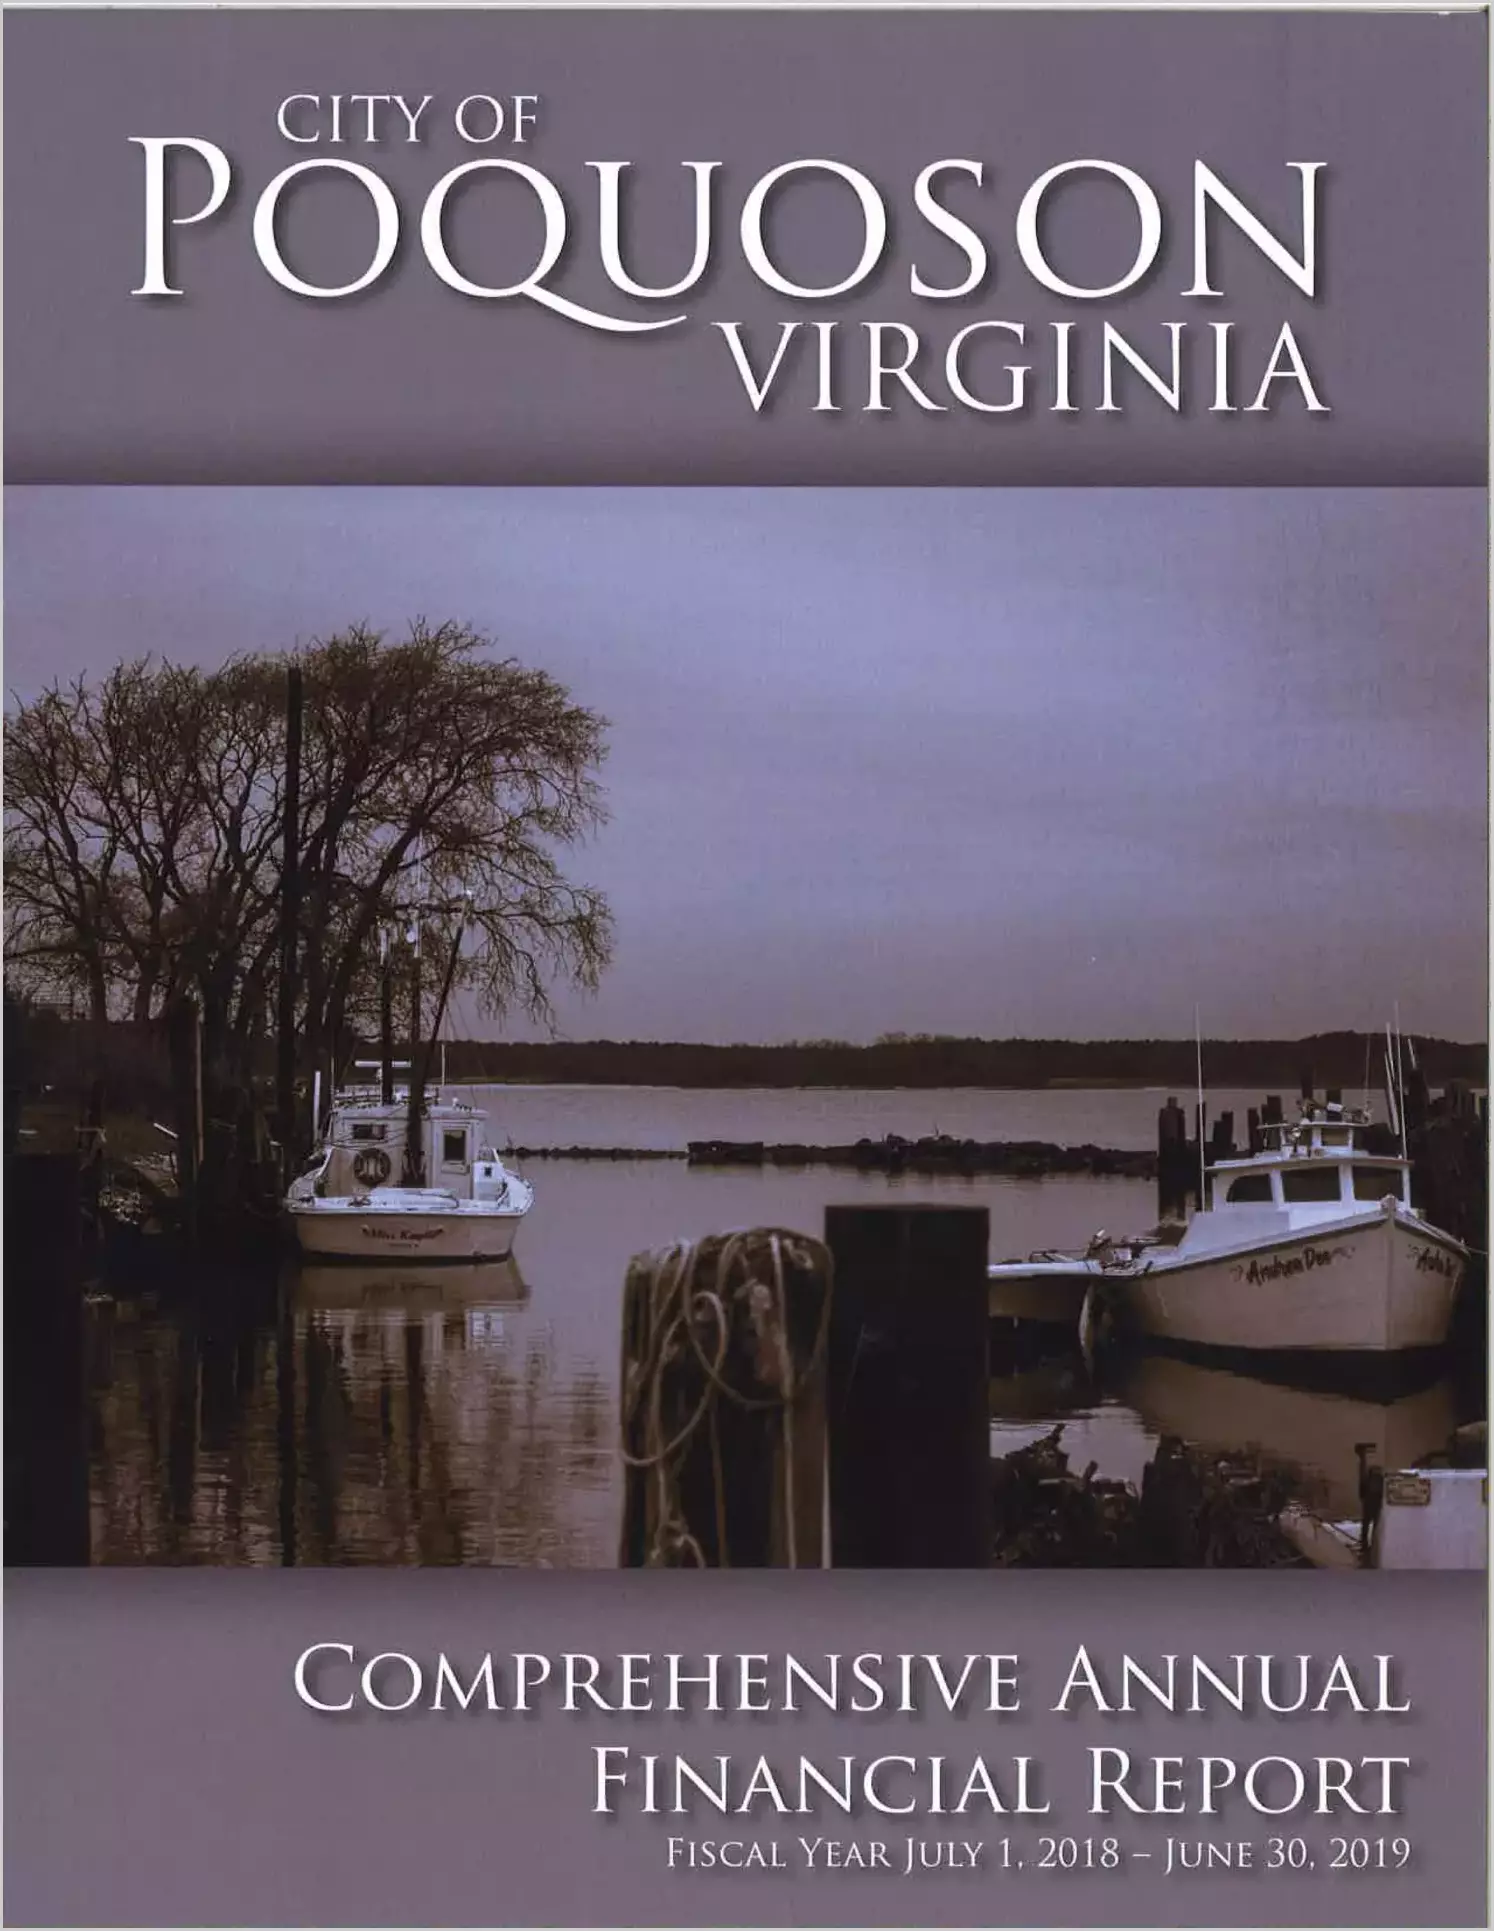 2019 Annual Financial Report for City of Poquoson